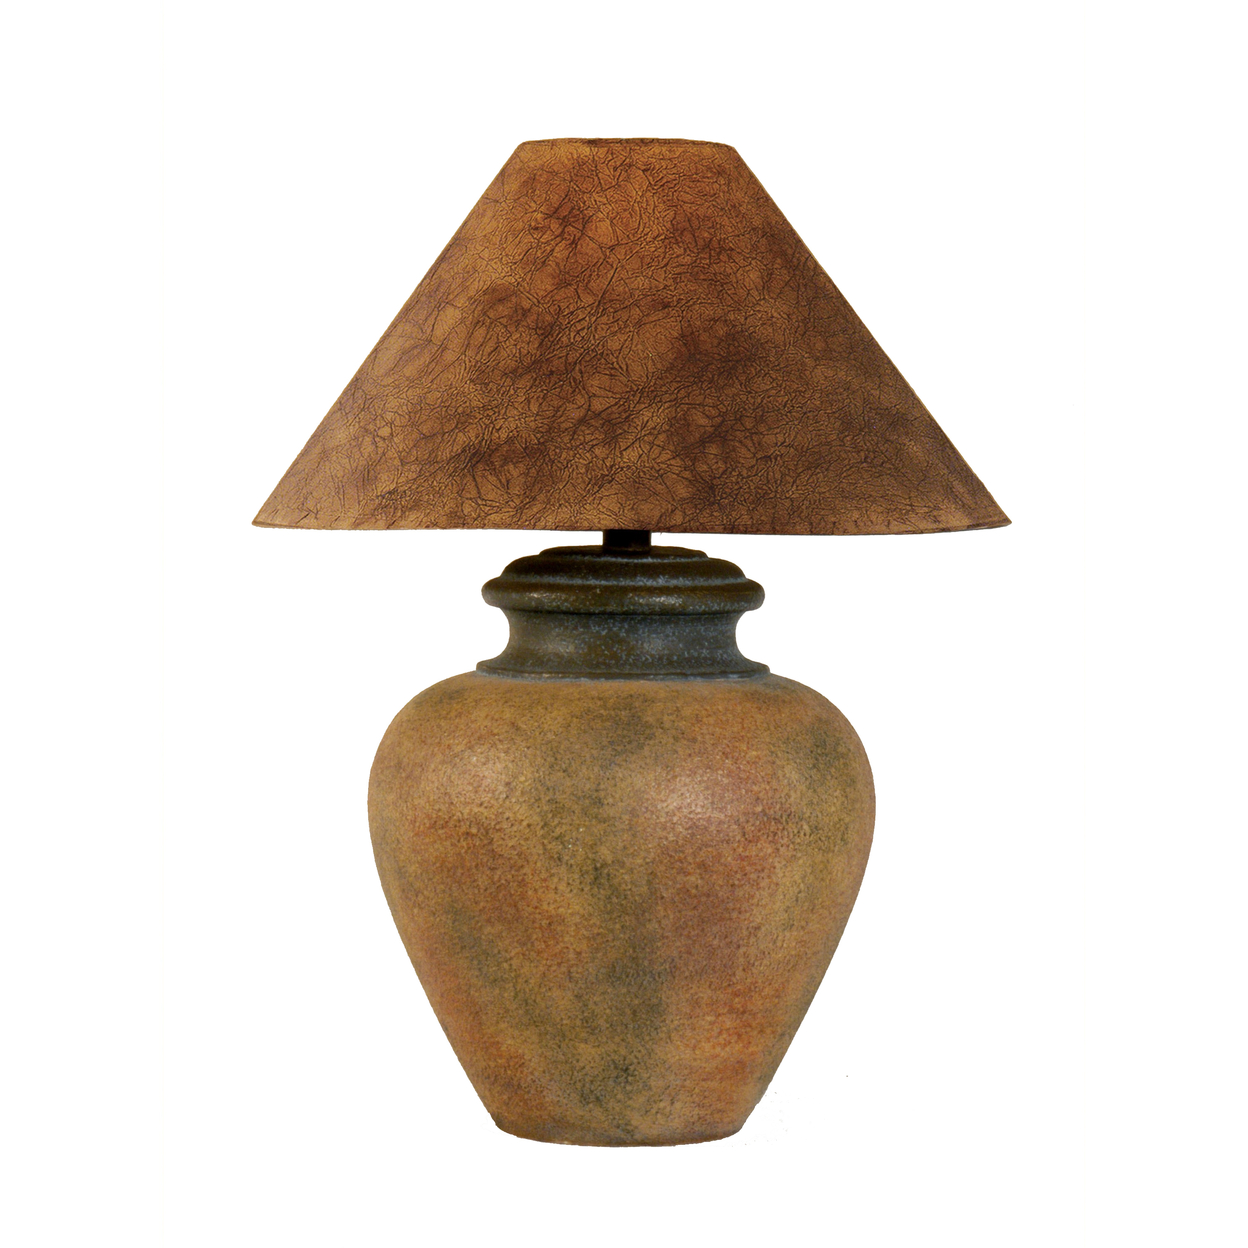 30 Inch Table Lamp, 3 Way Switch, Empire Shade, Green And Brown Finish - Saltoro Sherpi